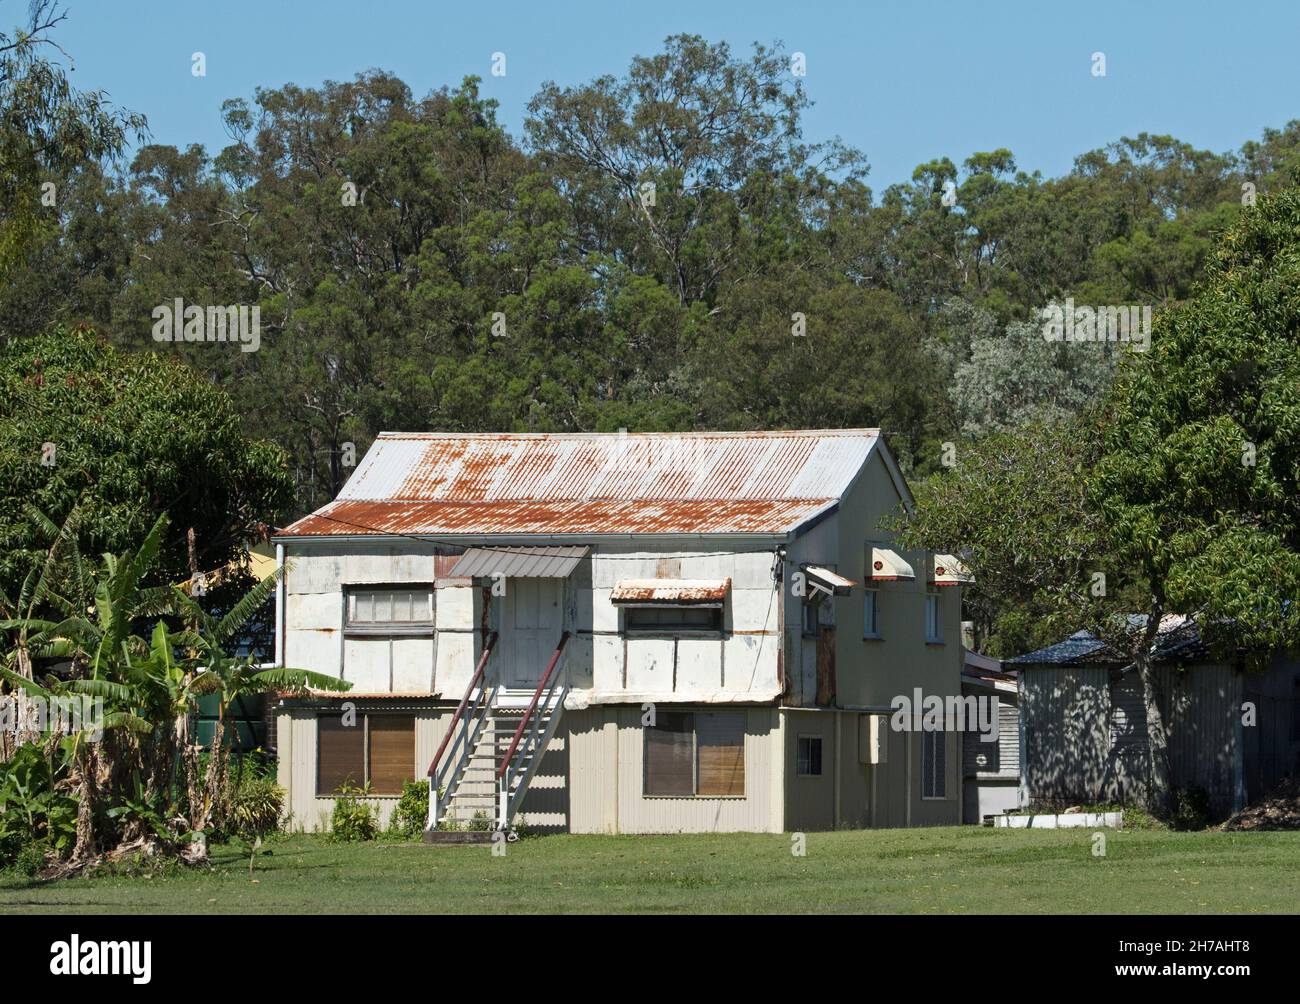 Old dilapidated double storey fibro cottage, fisherman's shack , at coastal town in Australia beside forest of tall trees Stock Photo